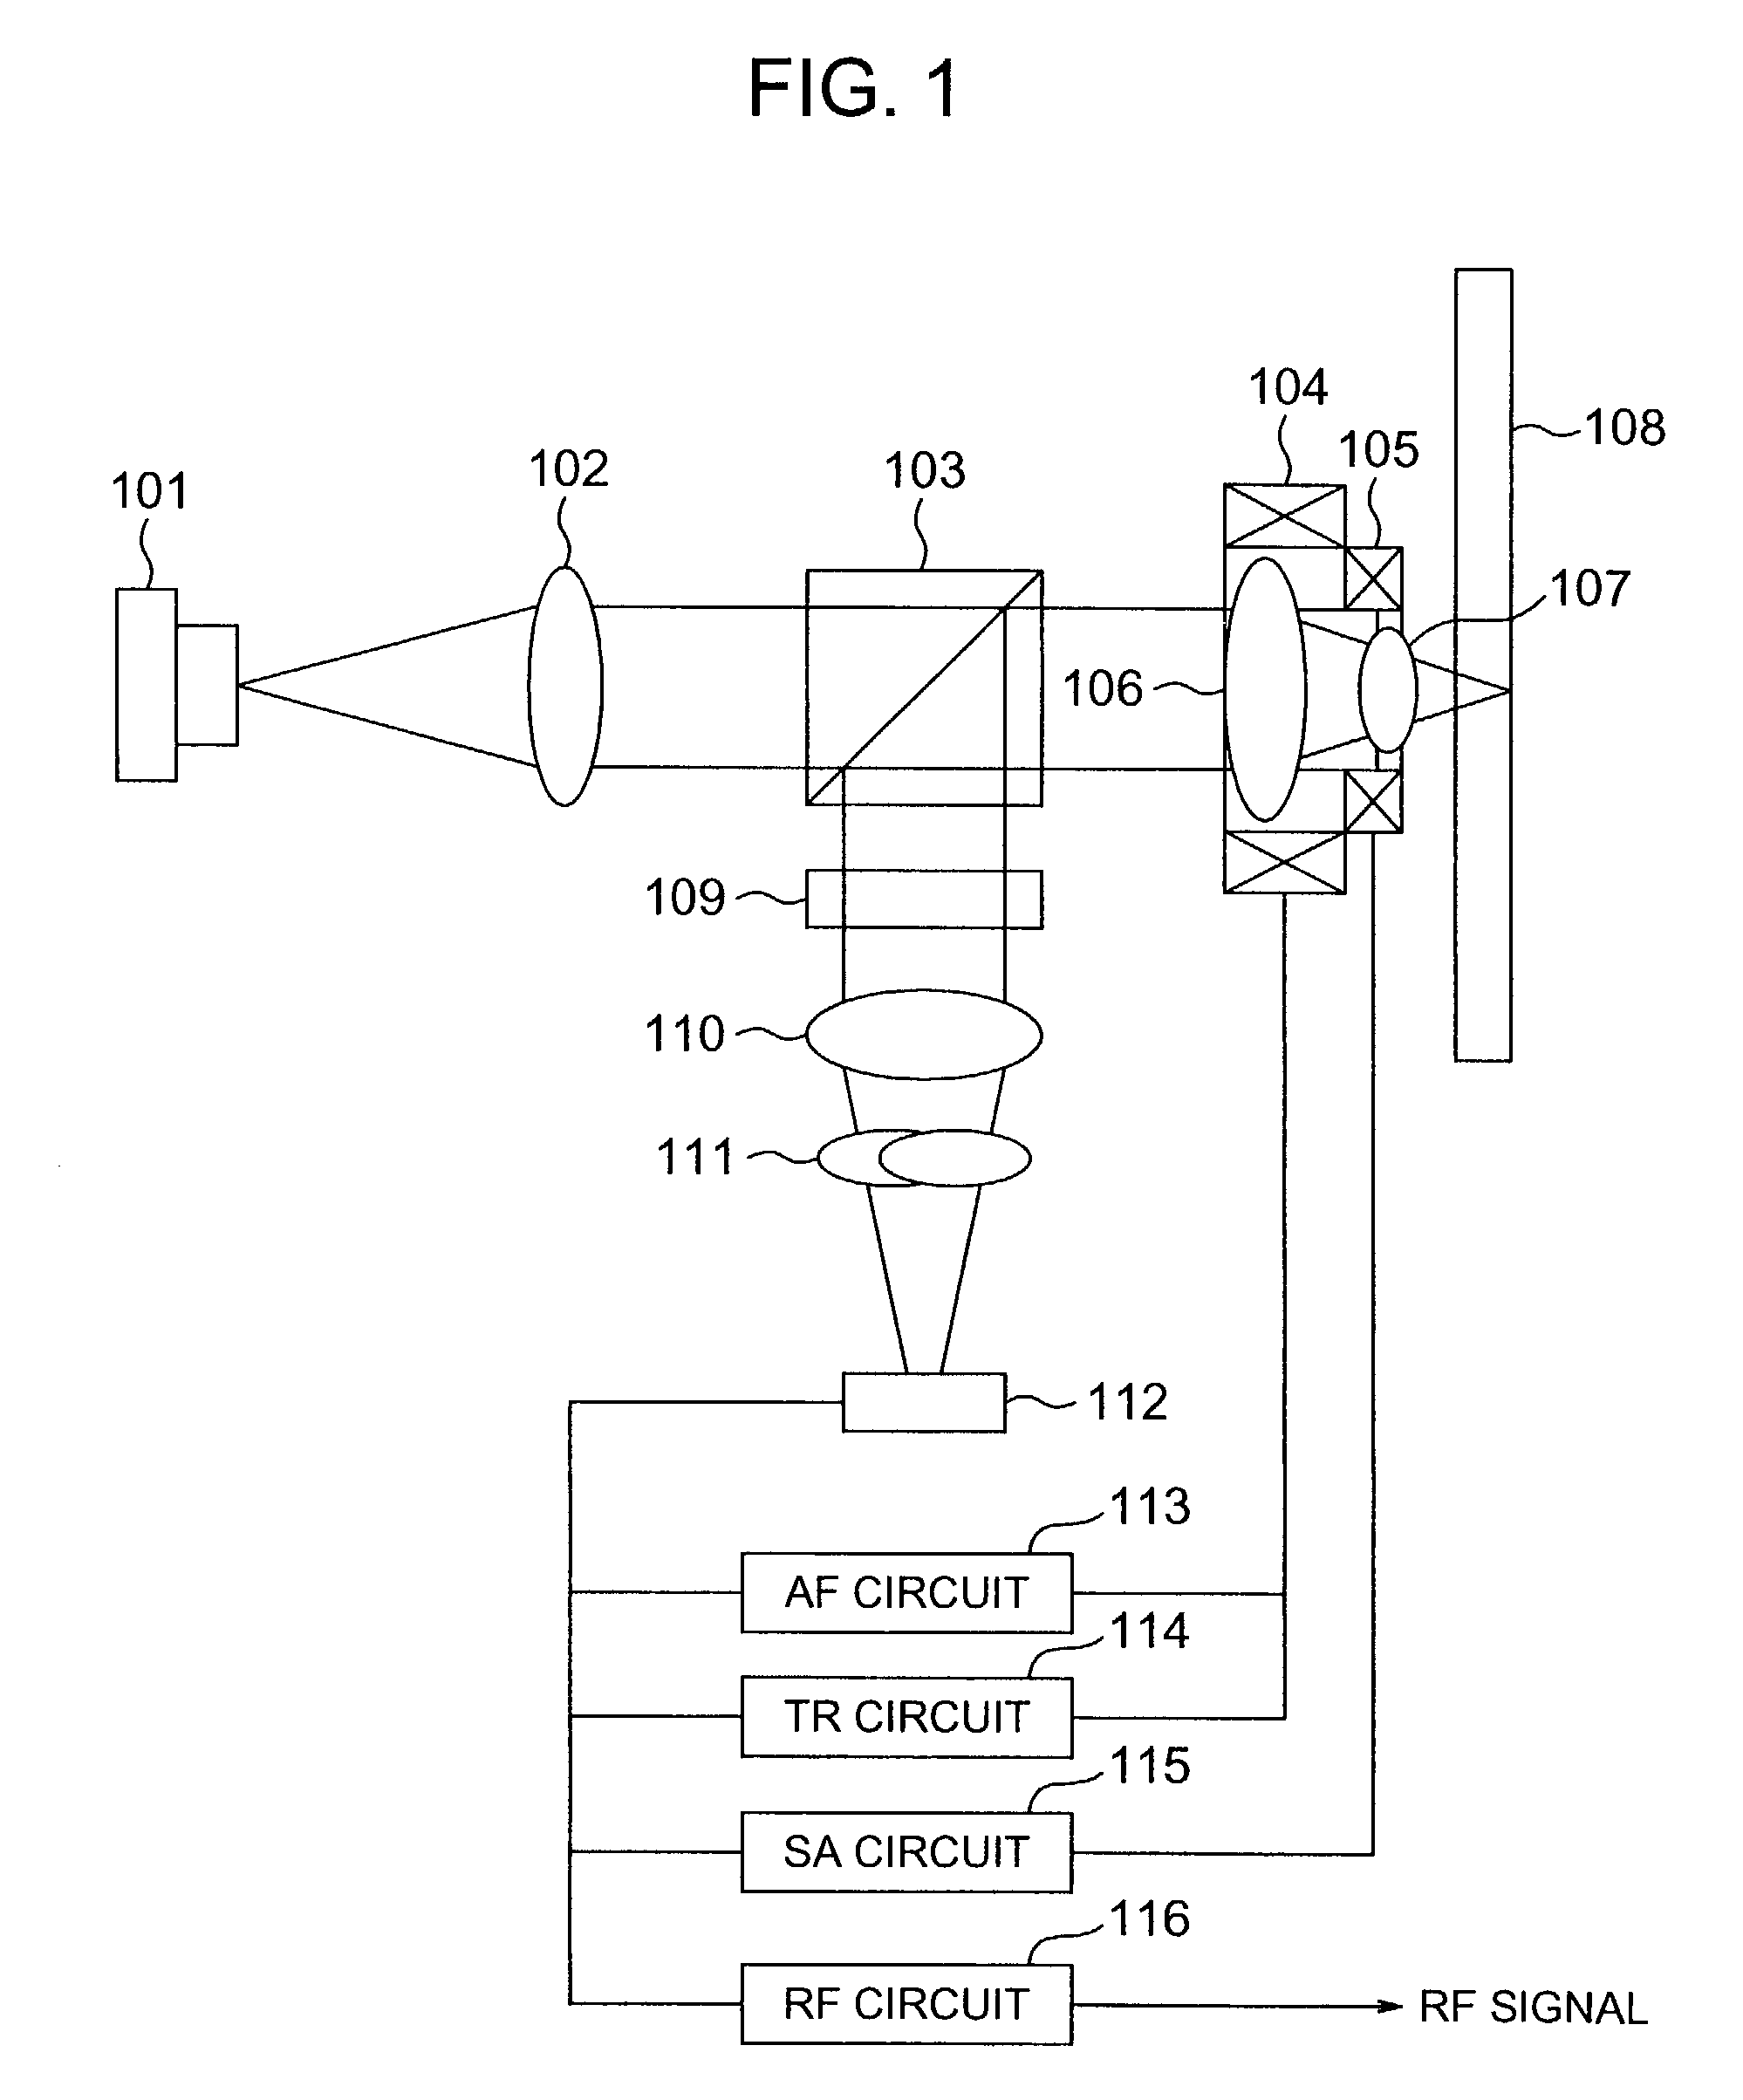 Optical disk apparatus using focal shift signals to control spherical aberration